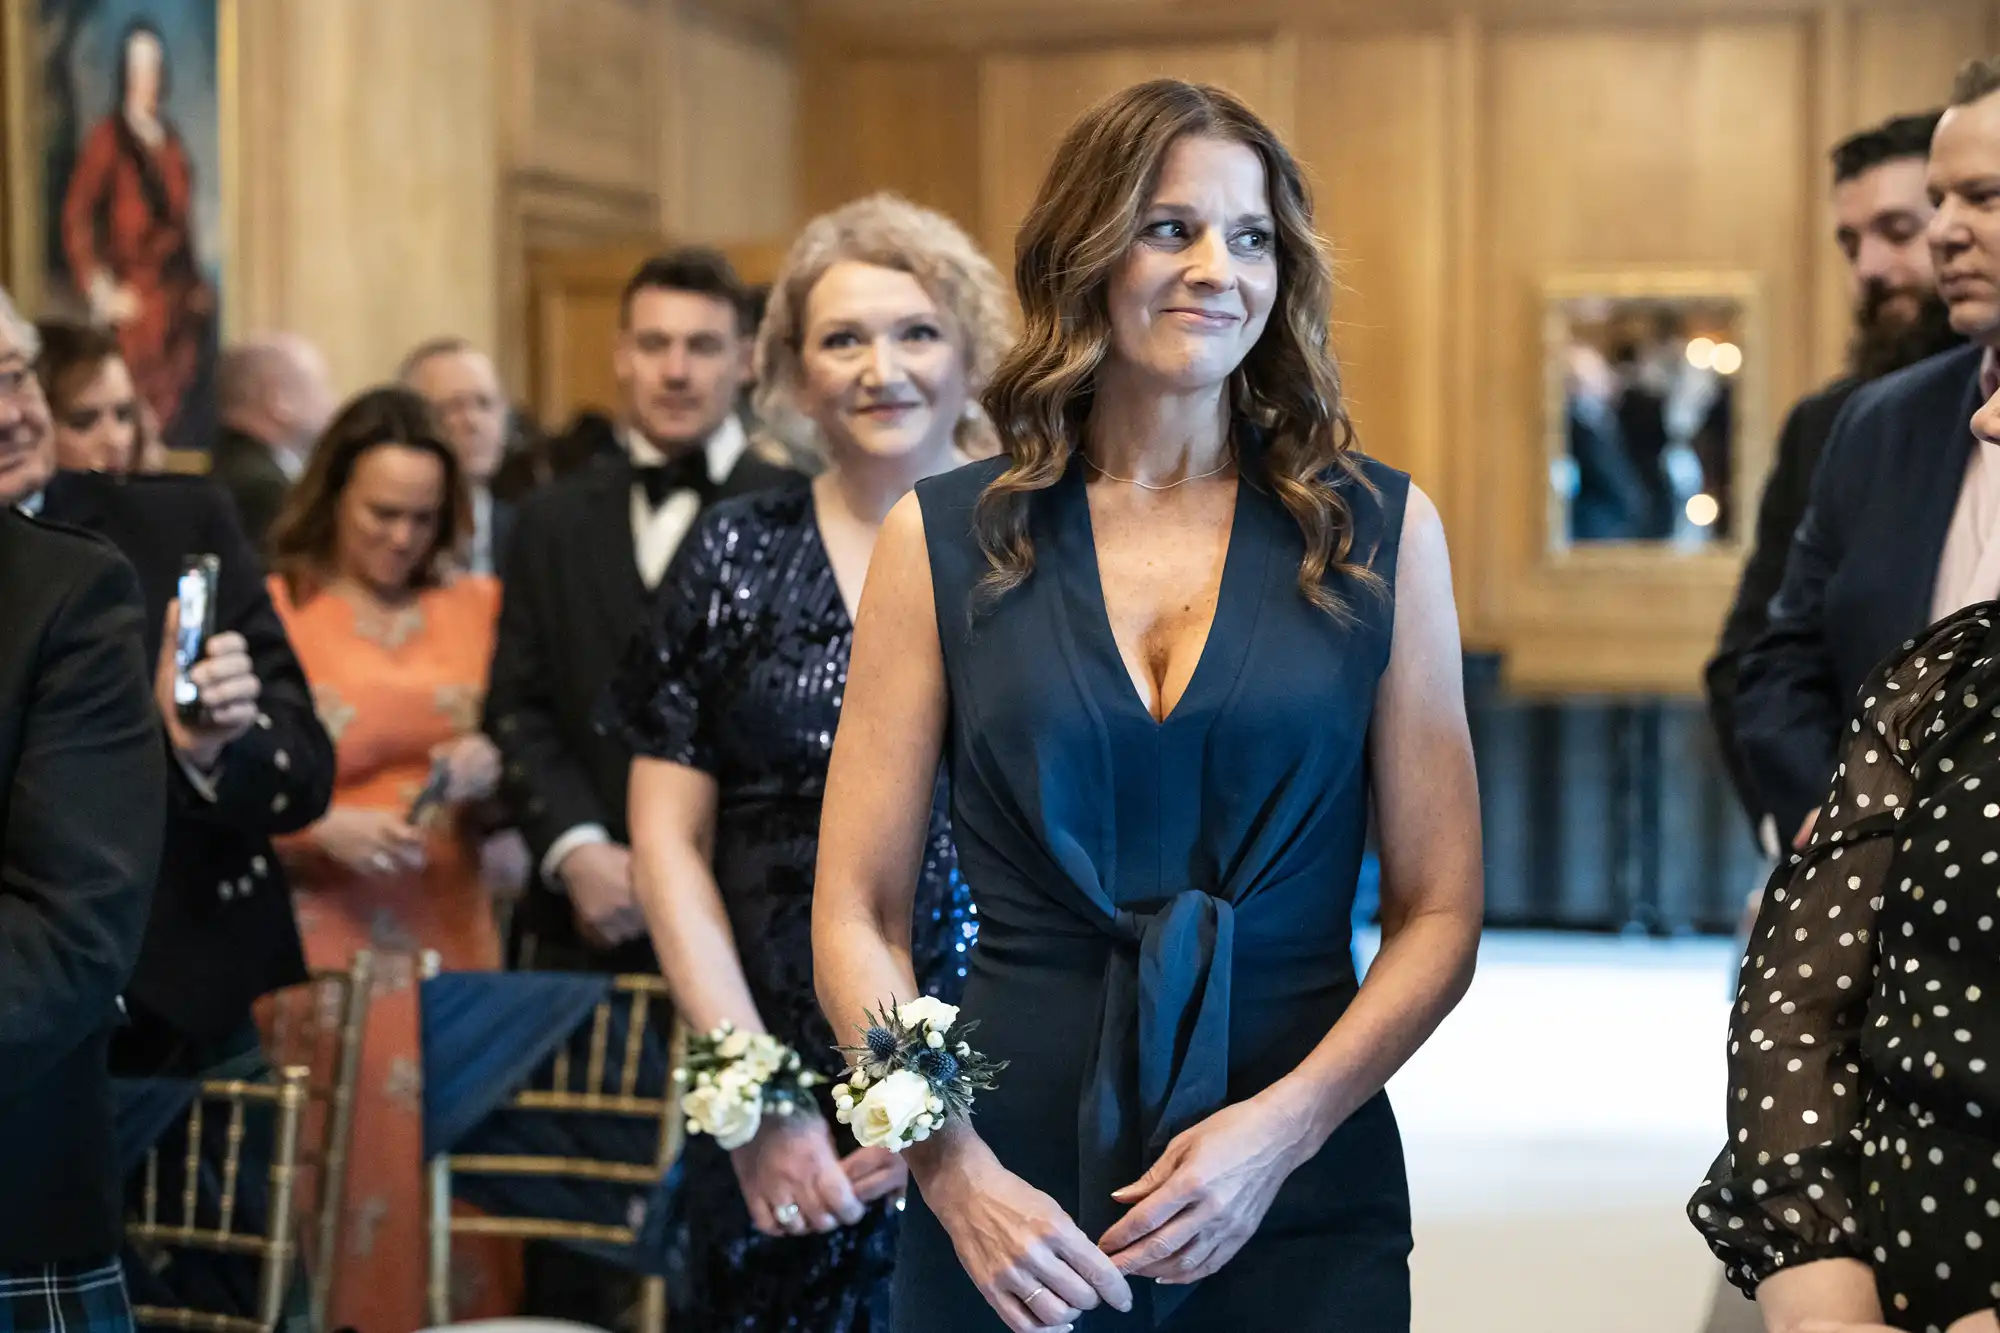 A woman in a navy dress with a flower corsage walks down an aisle with seated guests smiling and looking on in a formal indoor setting.